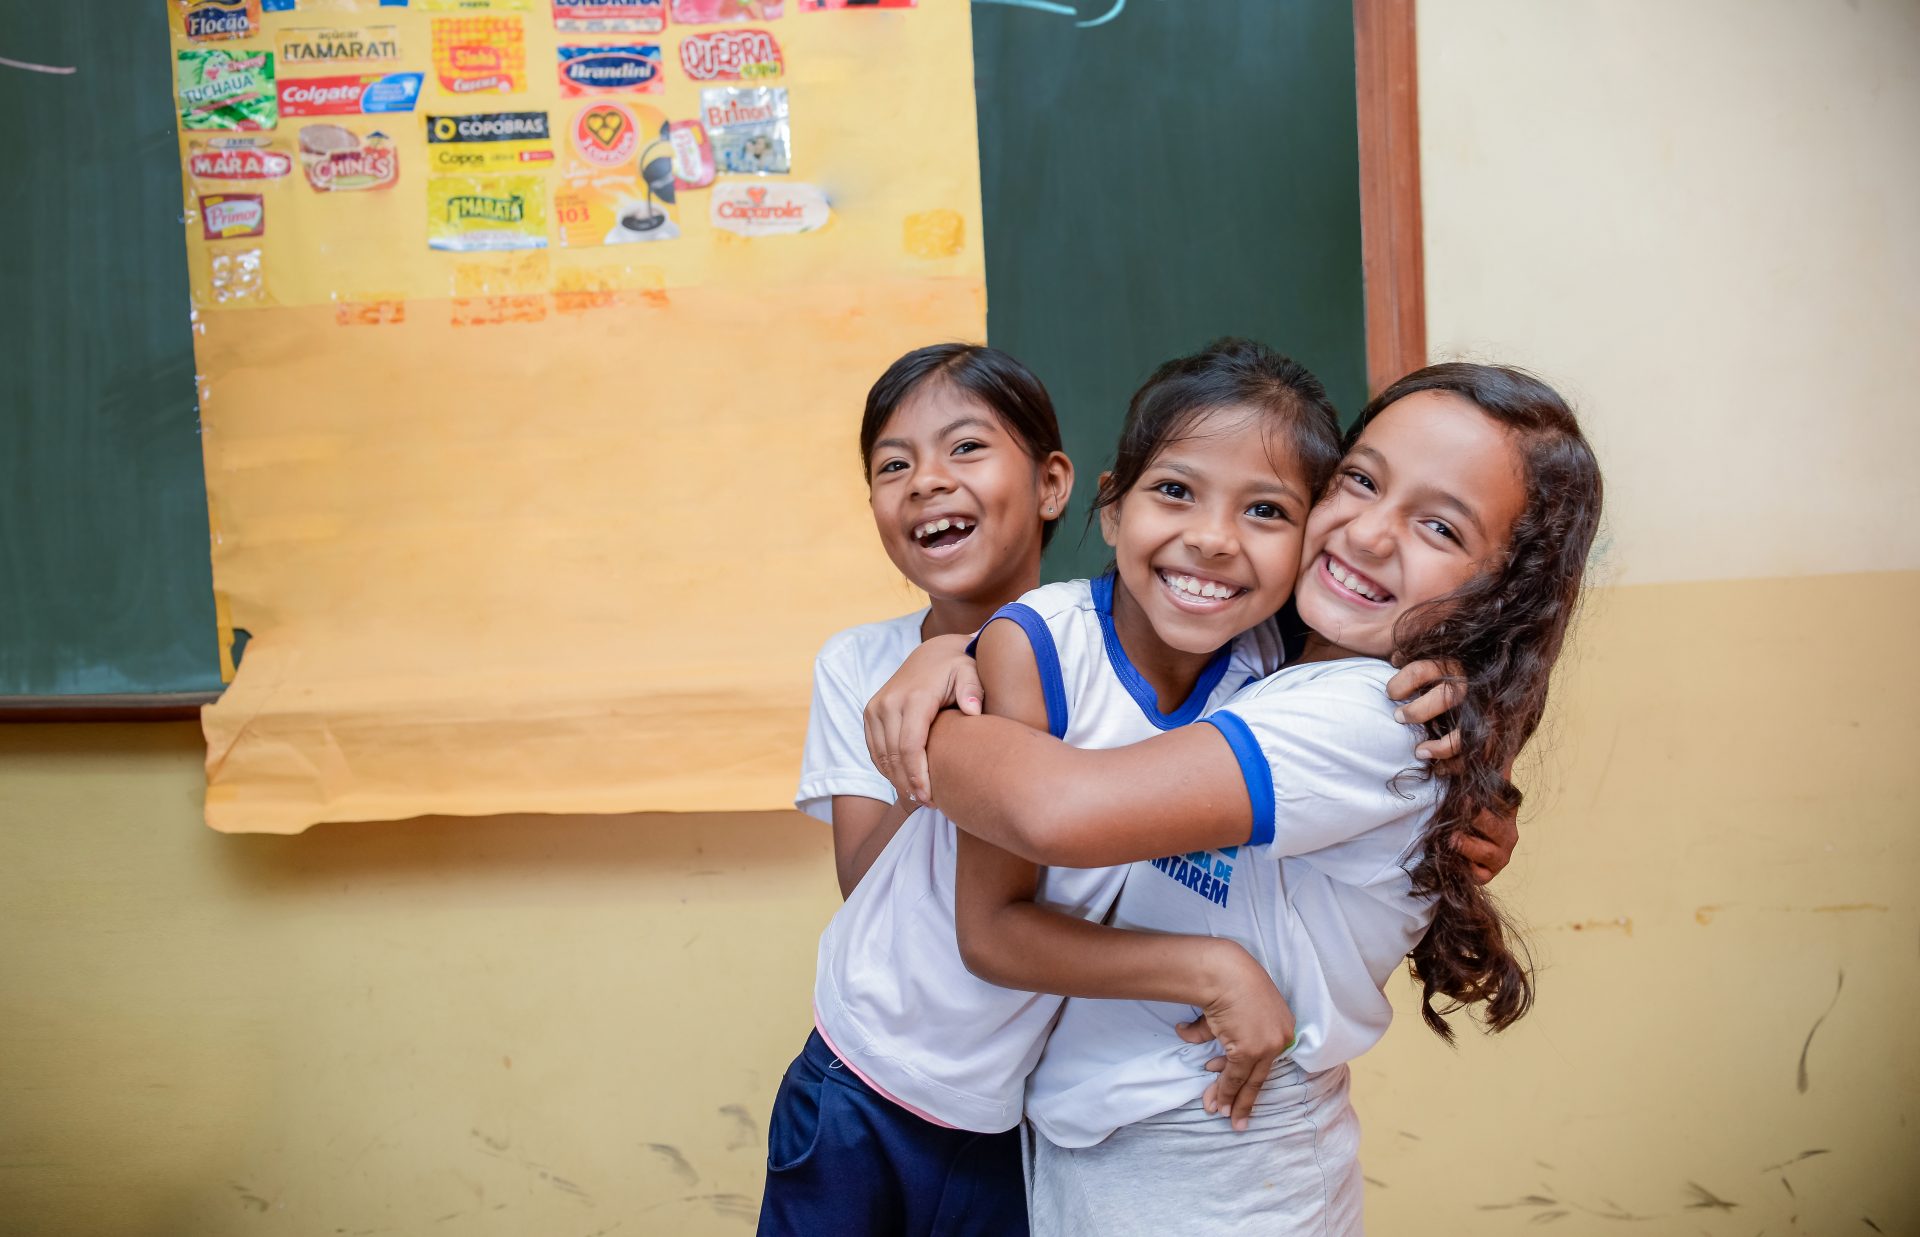 Three young girls hugging in front of a blackboard, symbolizing support for education.